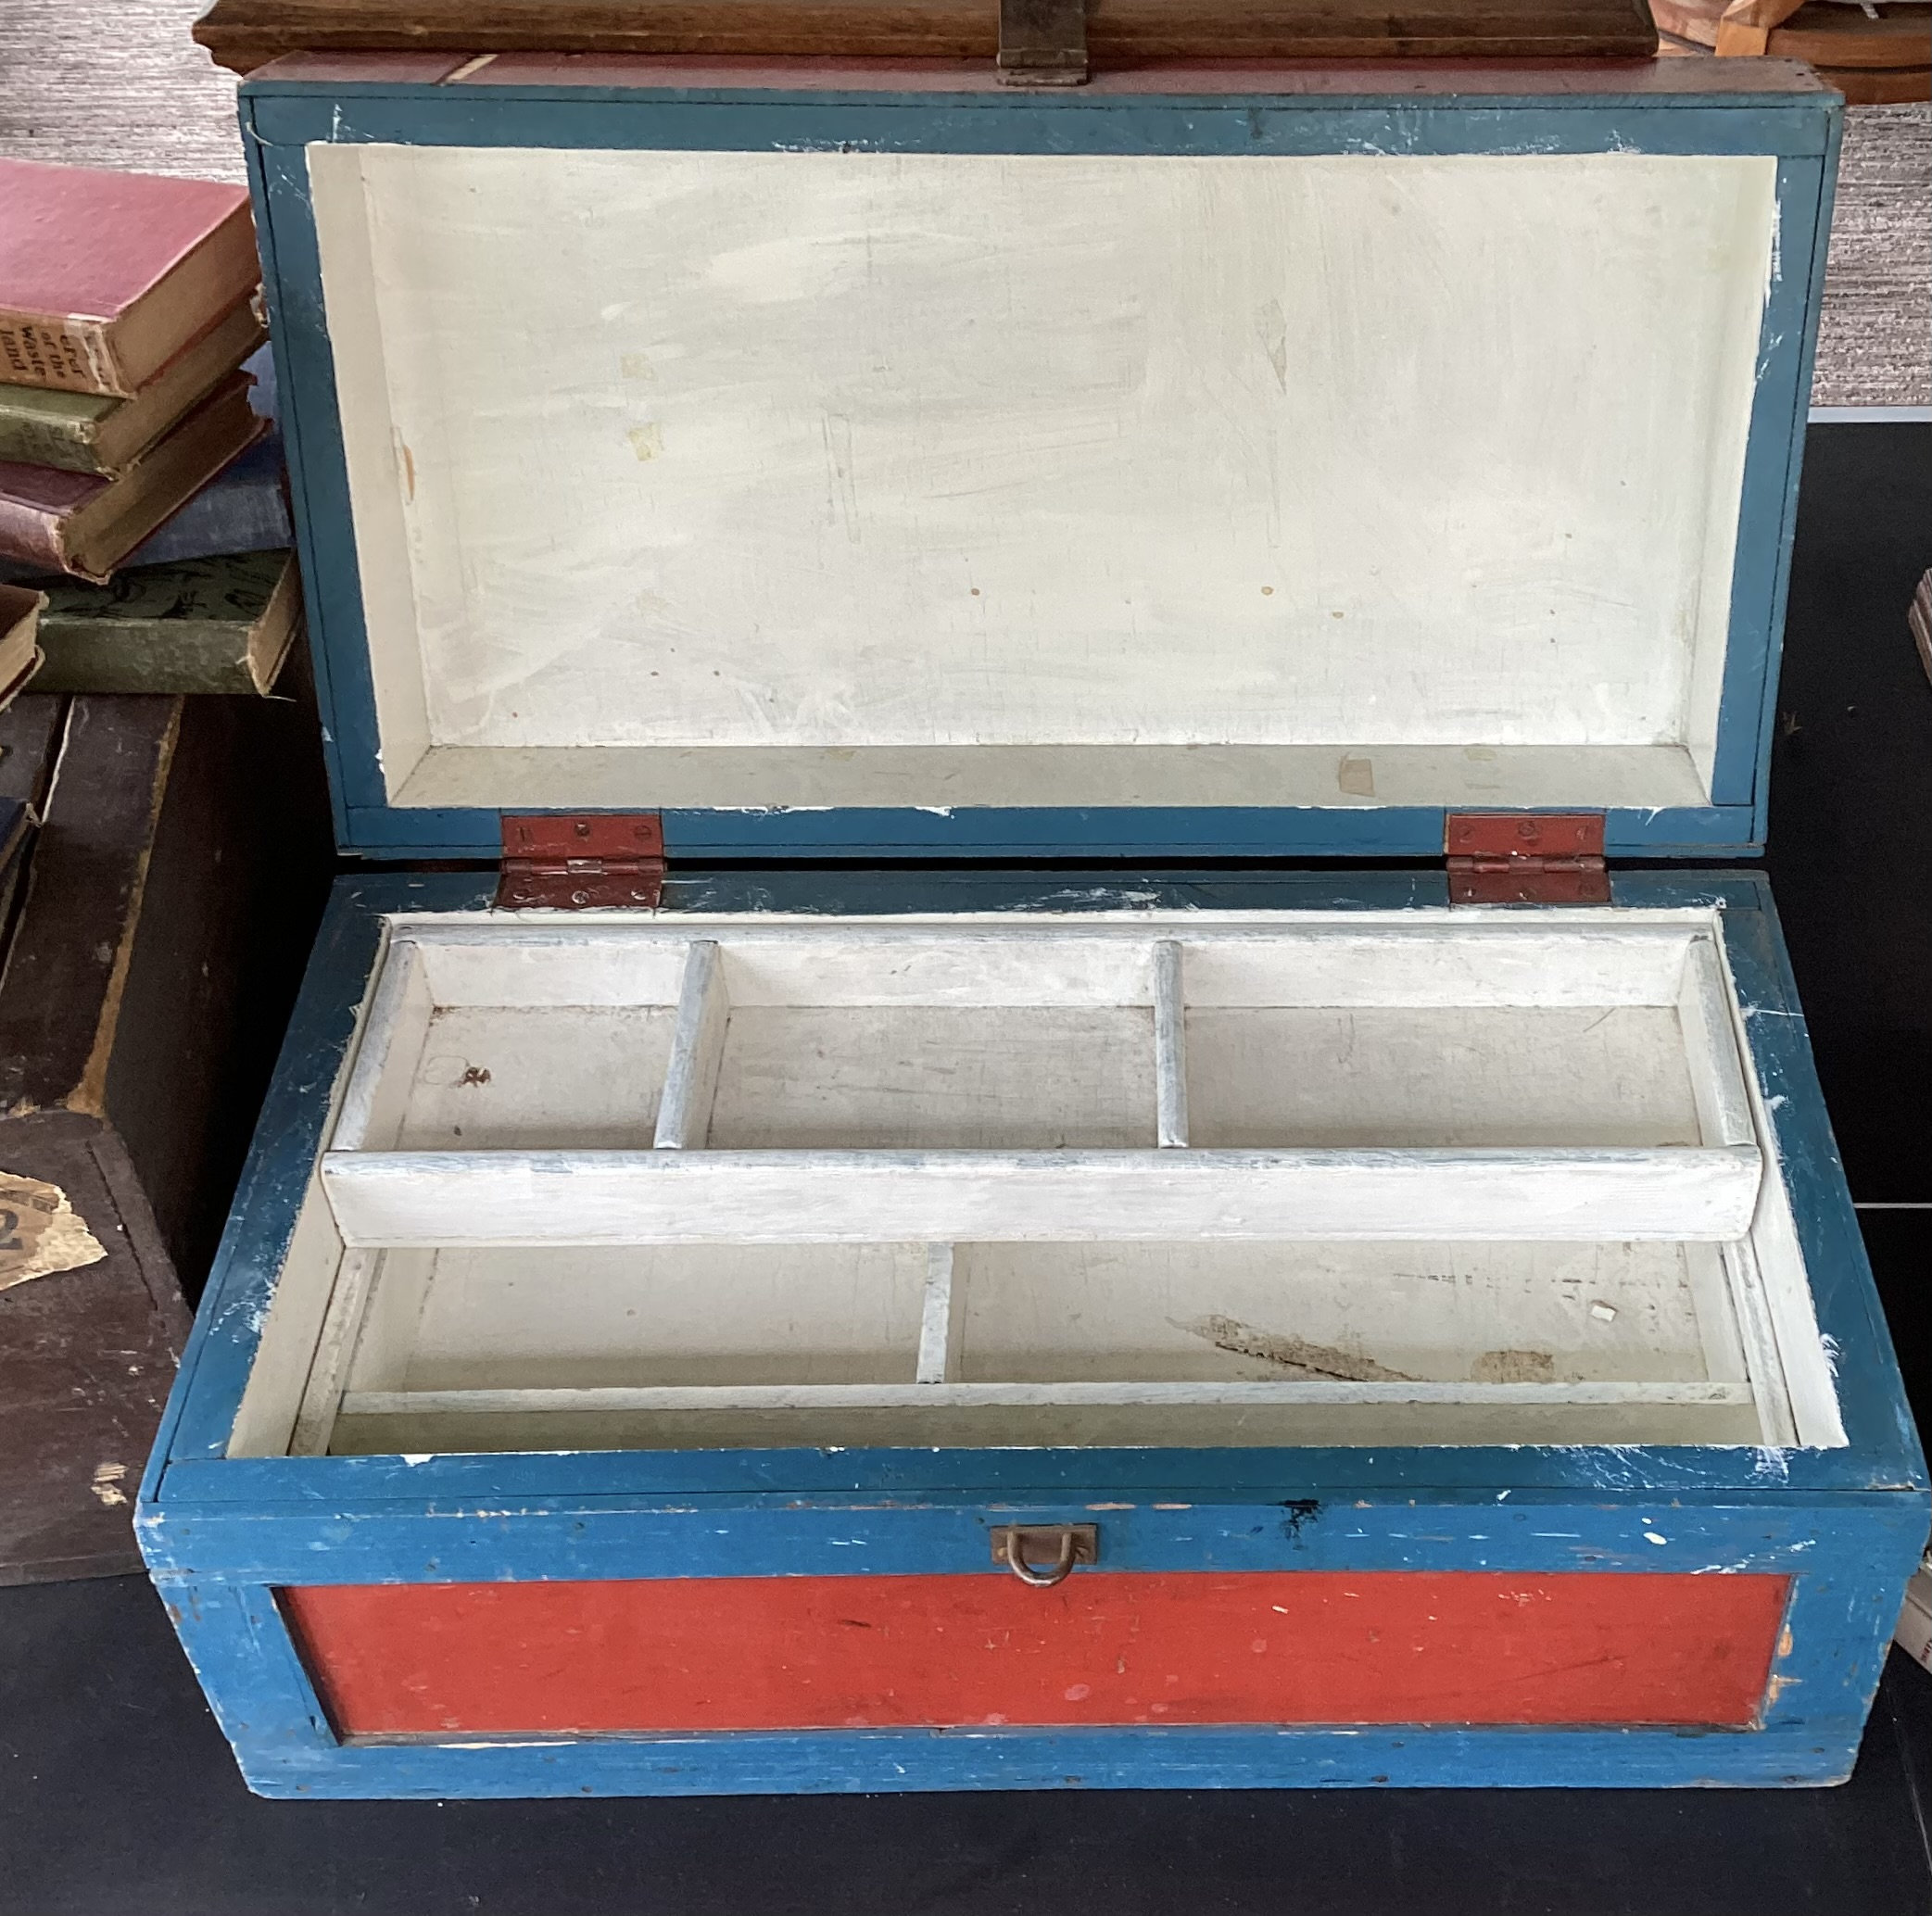 What could be the purpose of this old wooden box with lock and plastic  lining? : r/whatisthisthing